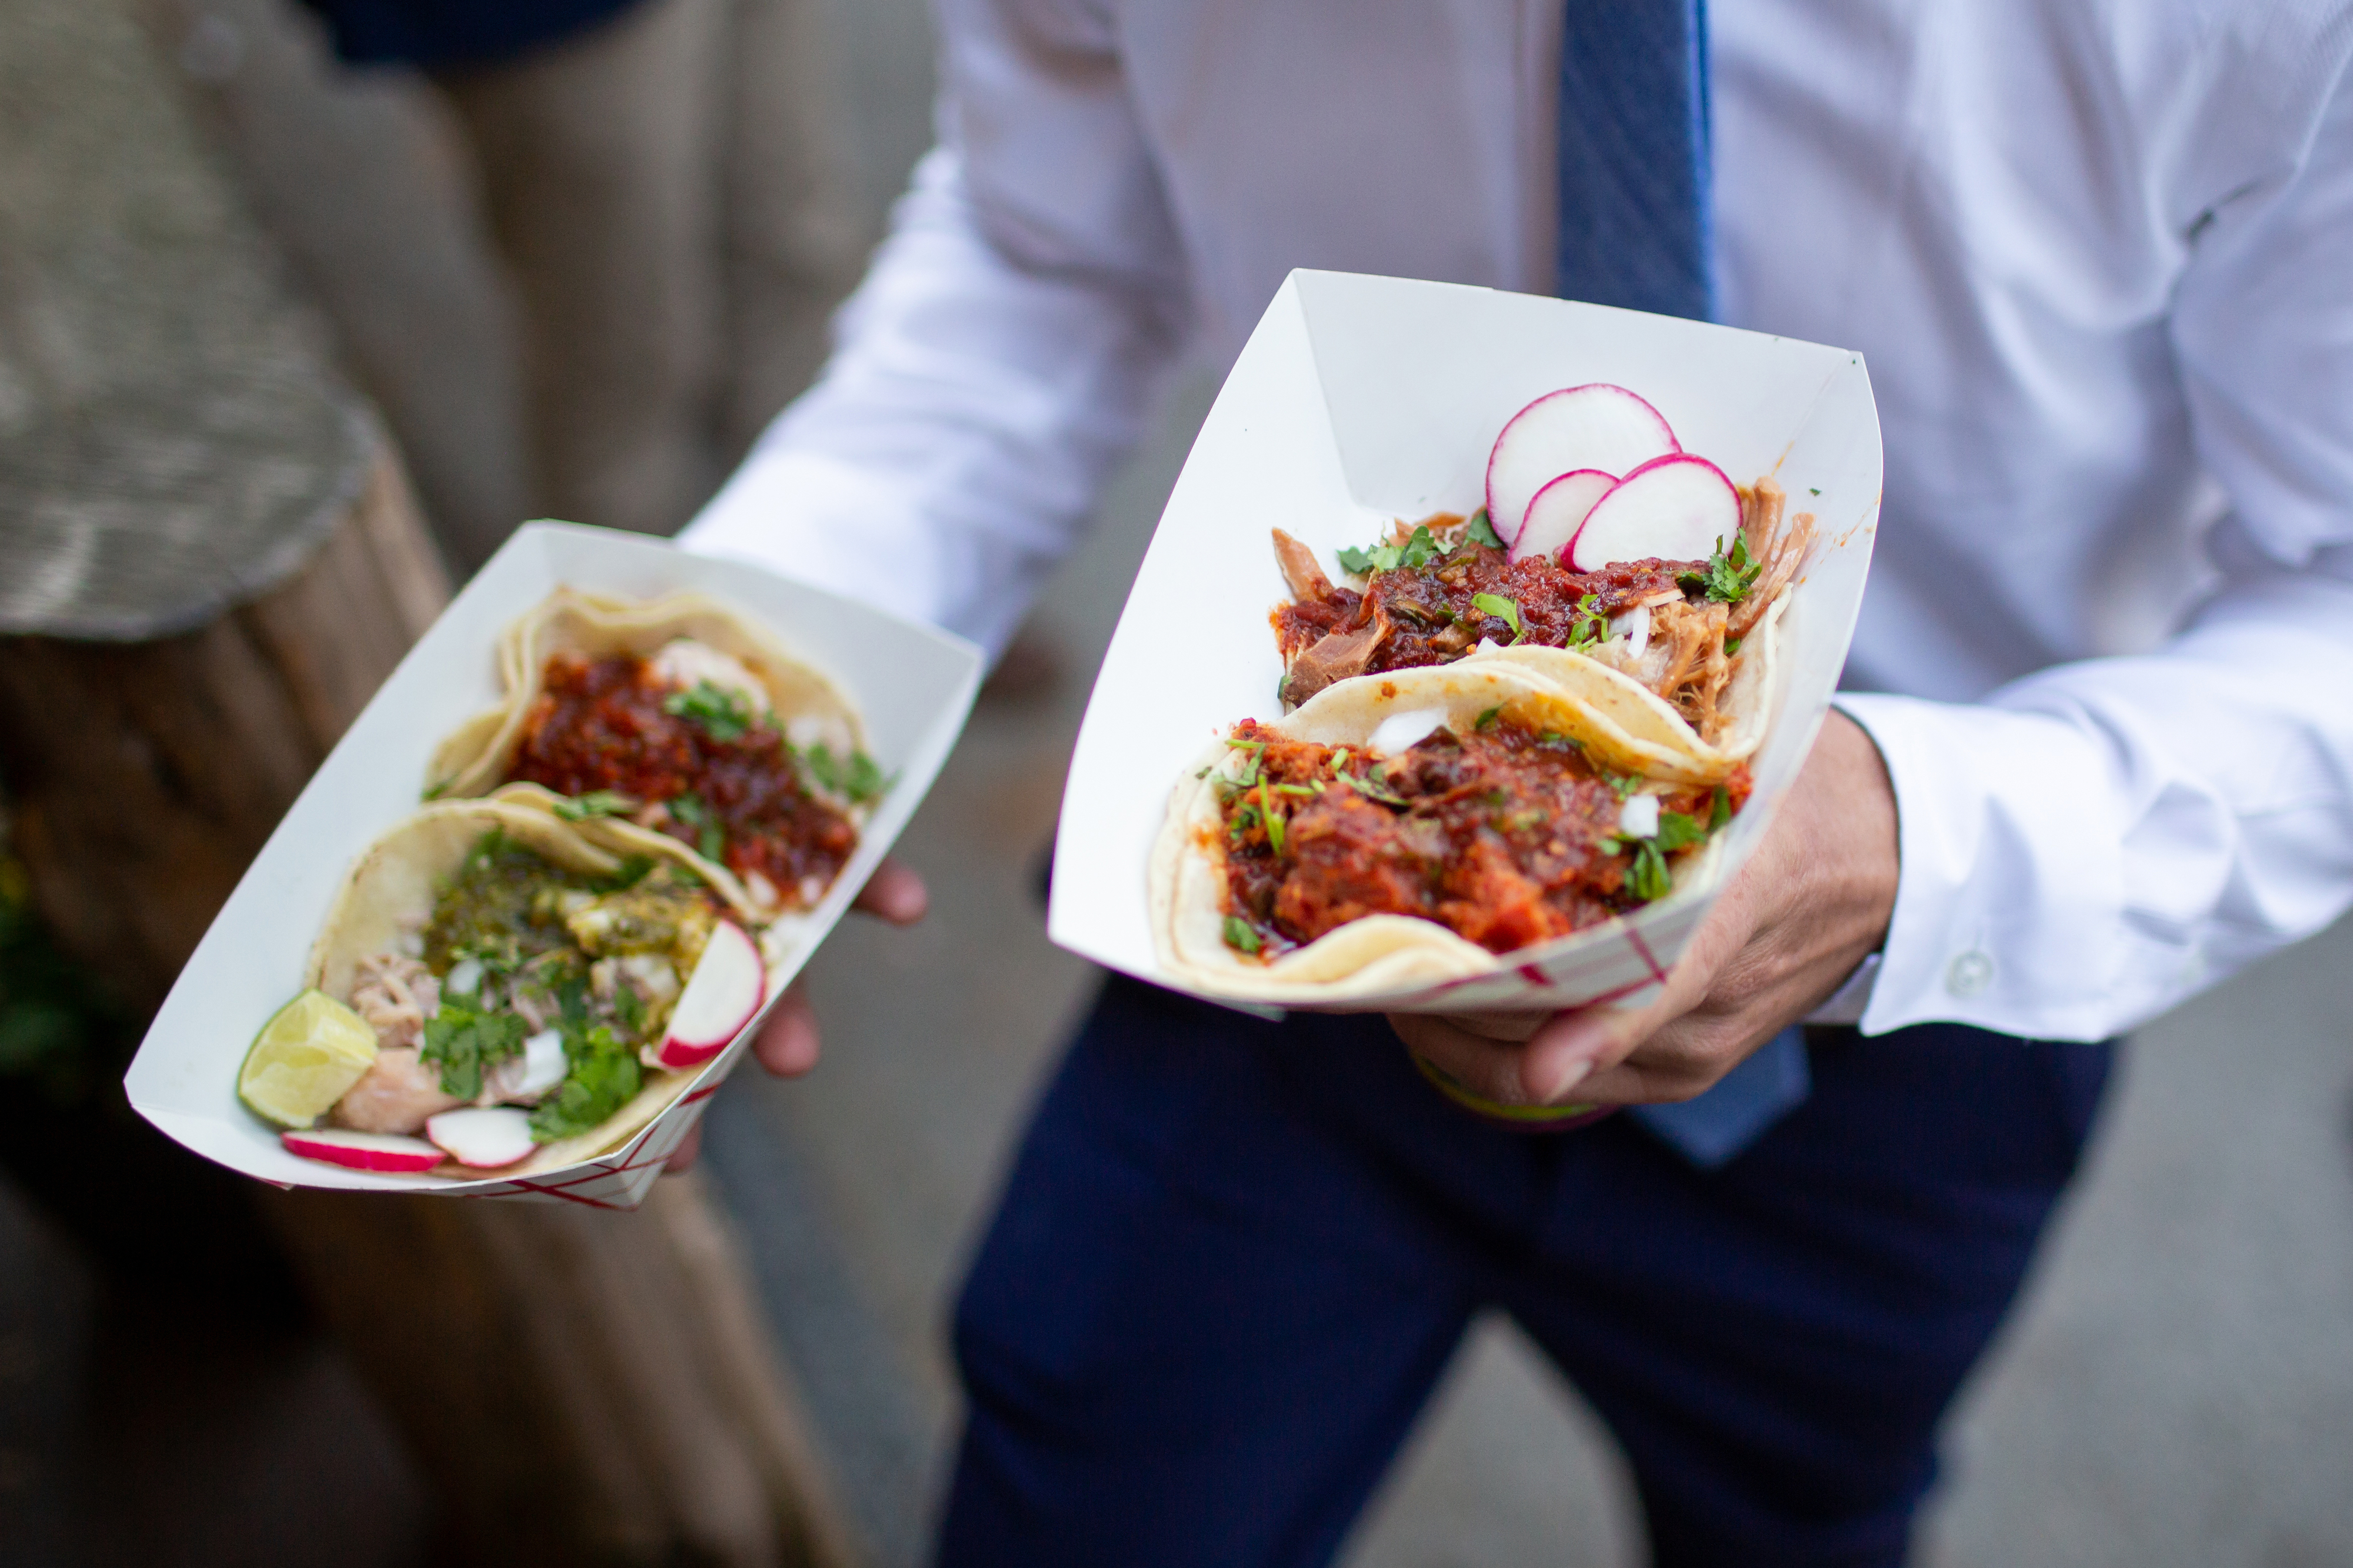 Person holding two tacos with a variety of toppings, likely at a street food stand or outdoor event